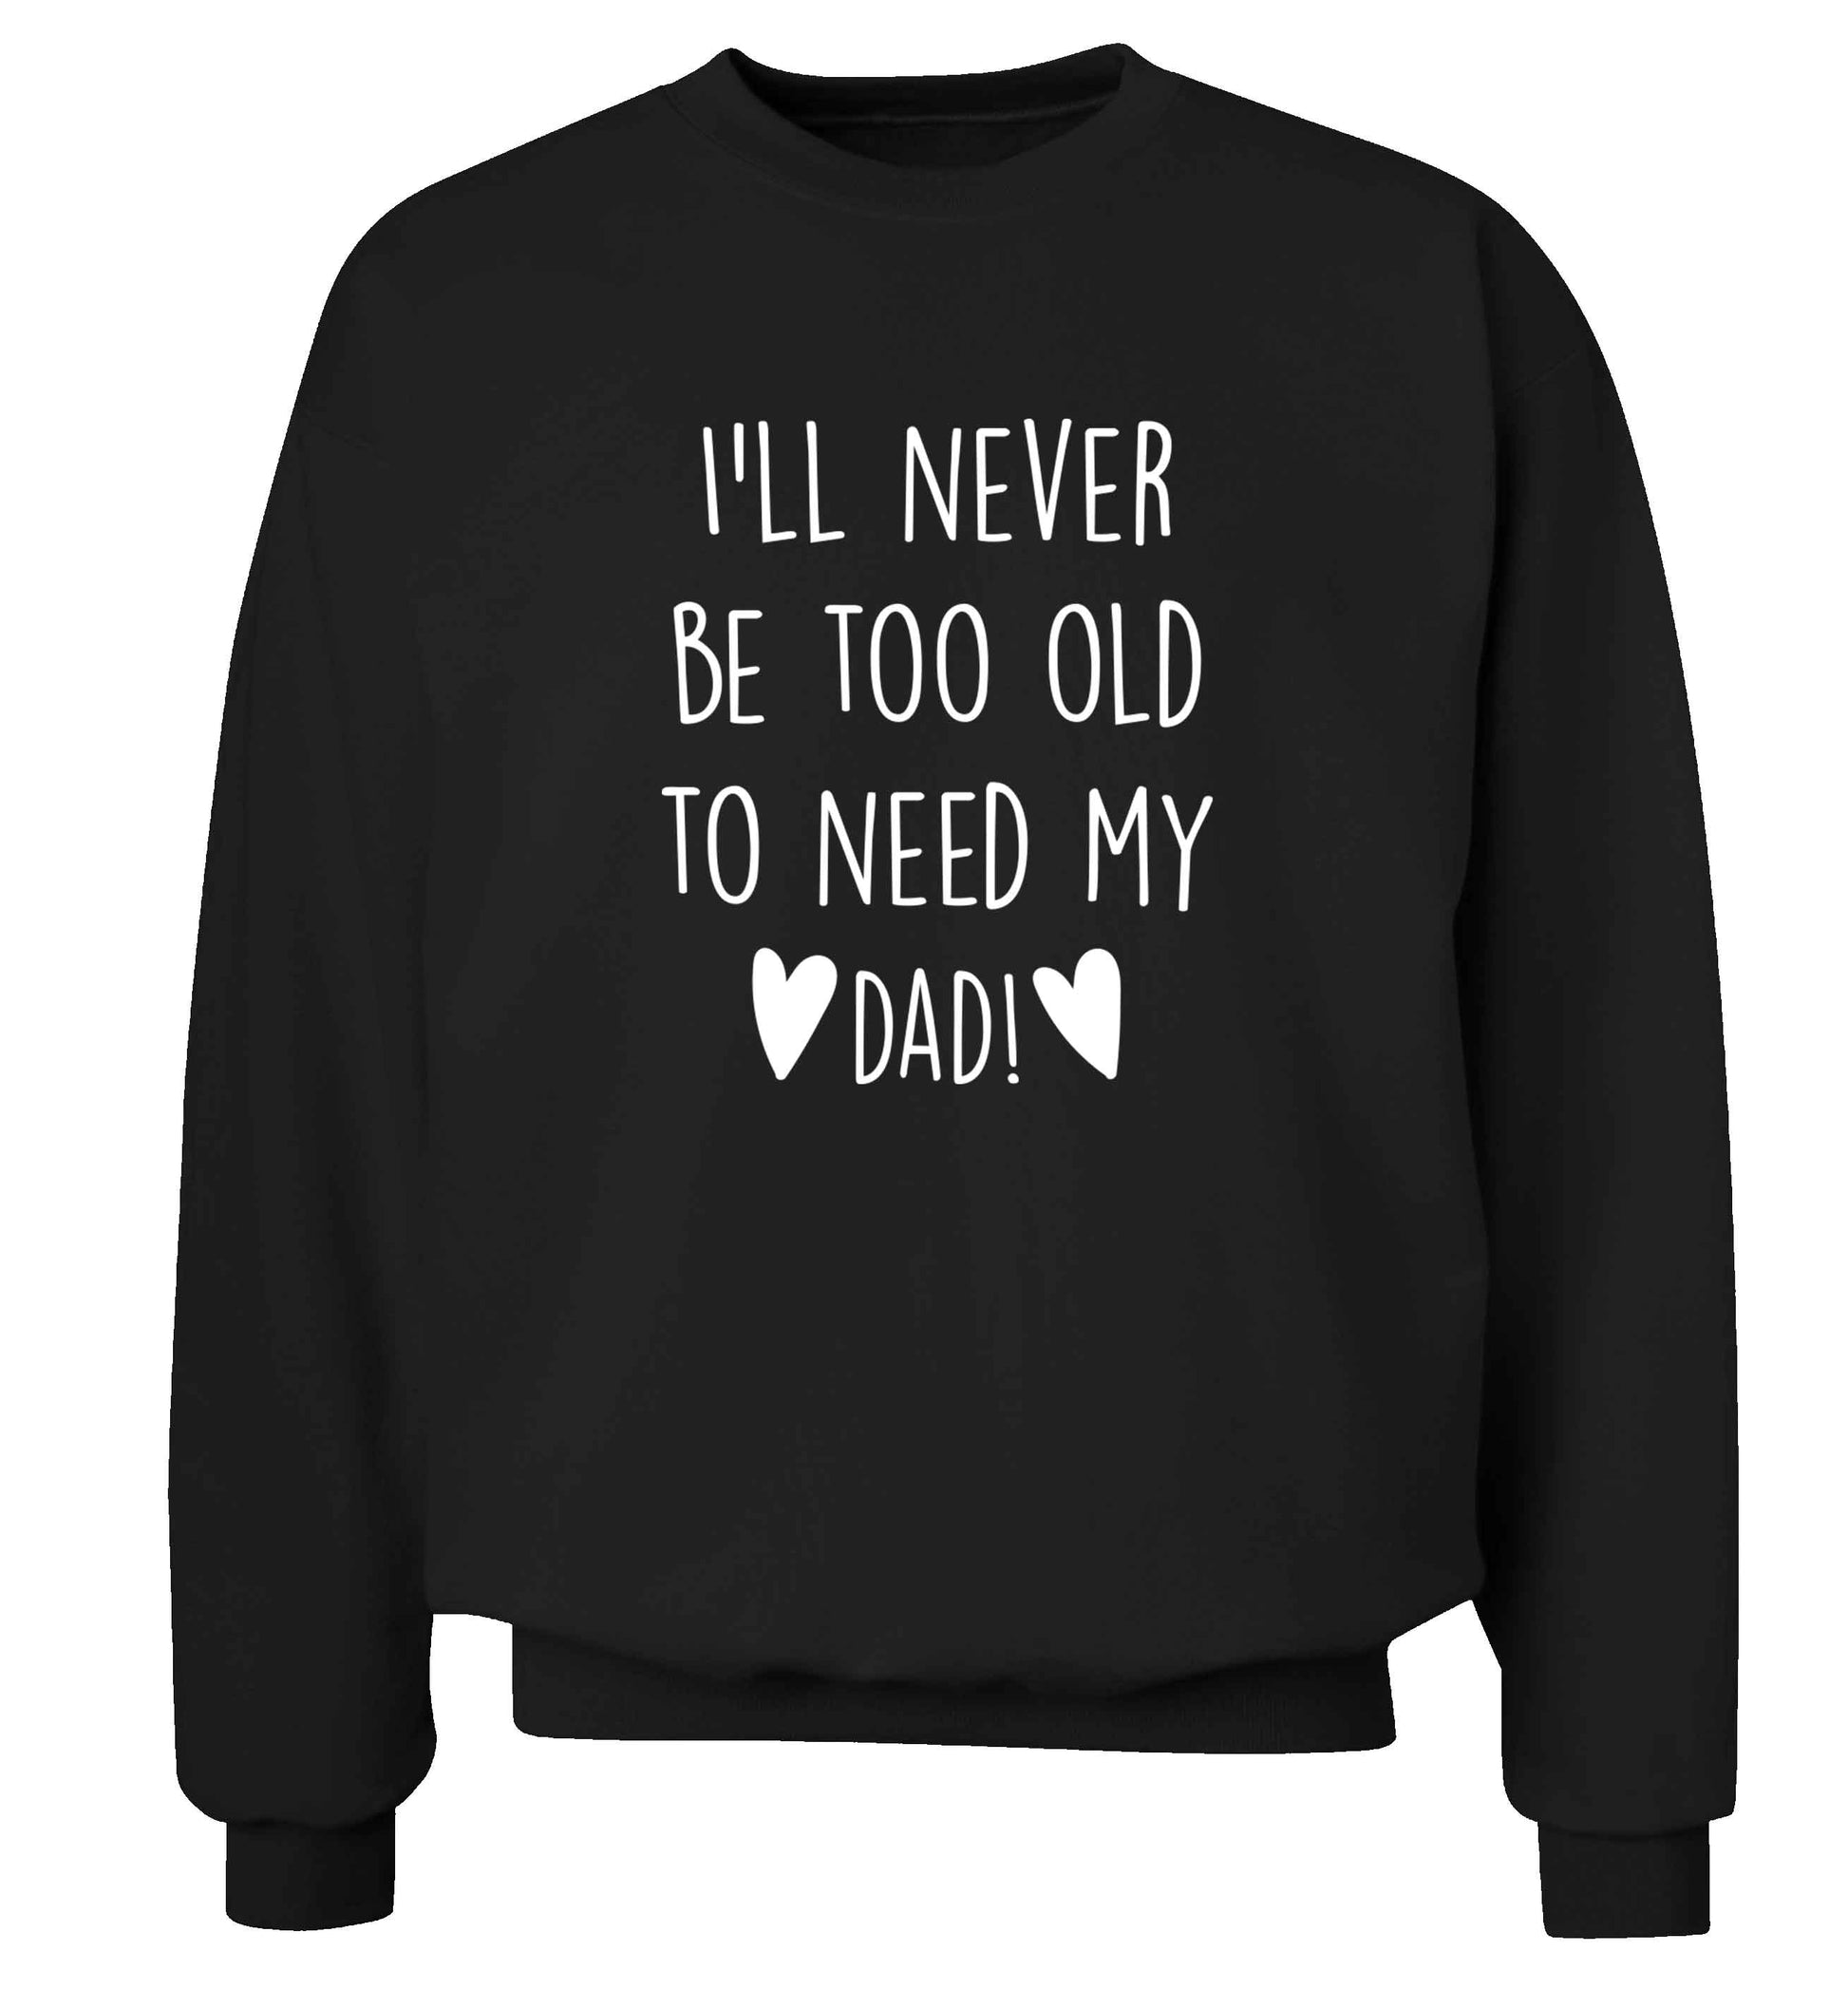 I'll never be too old to need my dad adult's unisex black sweater 2XL